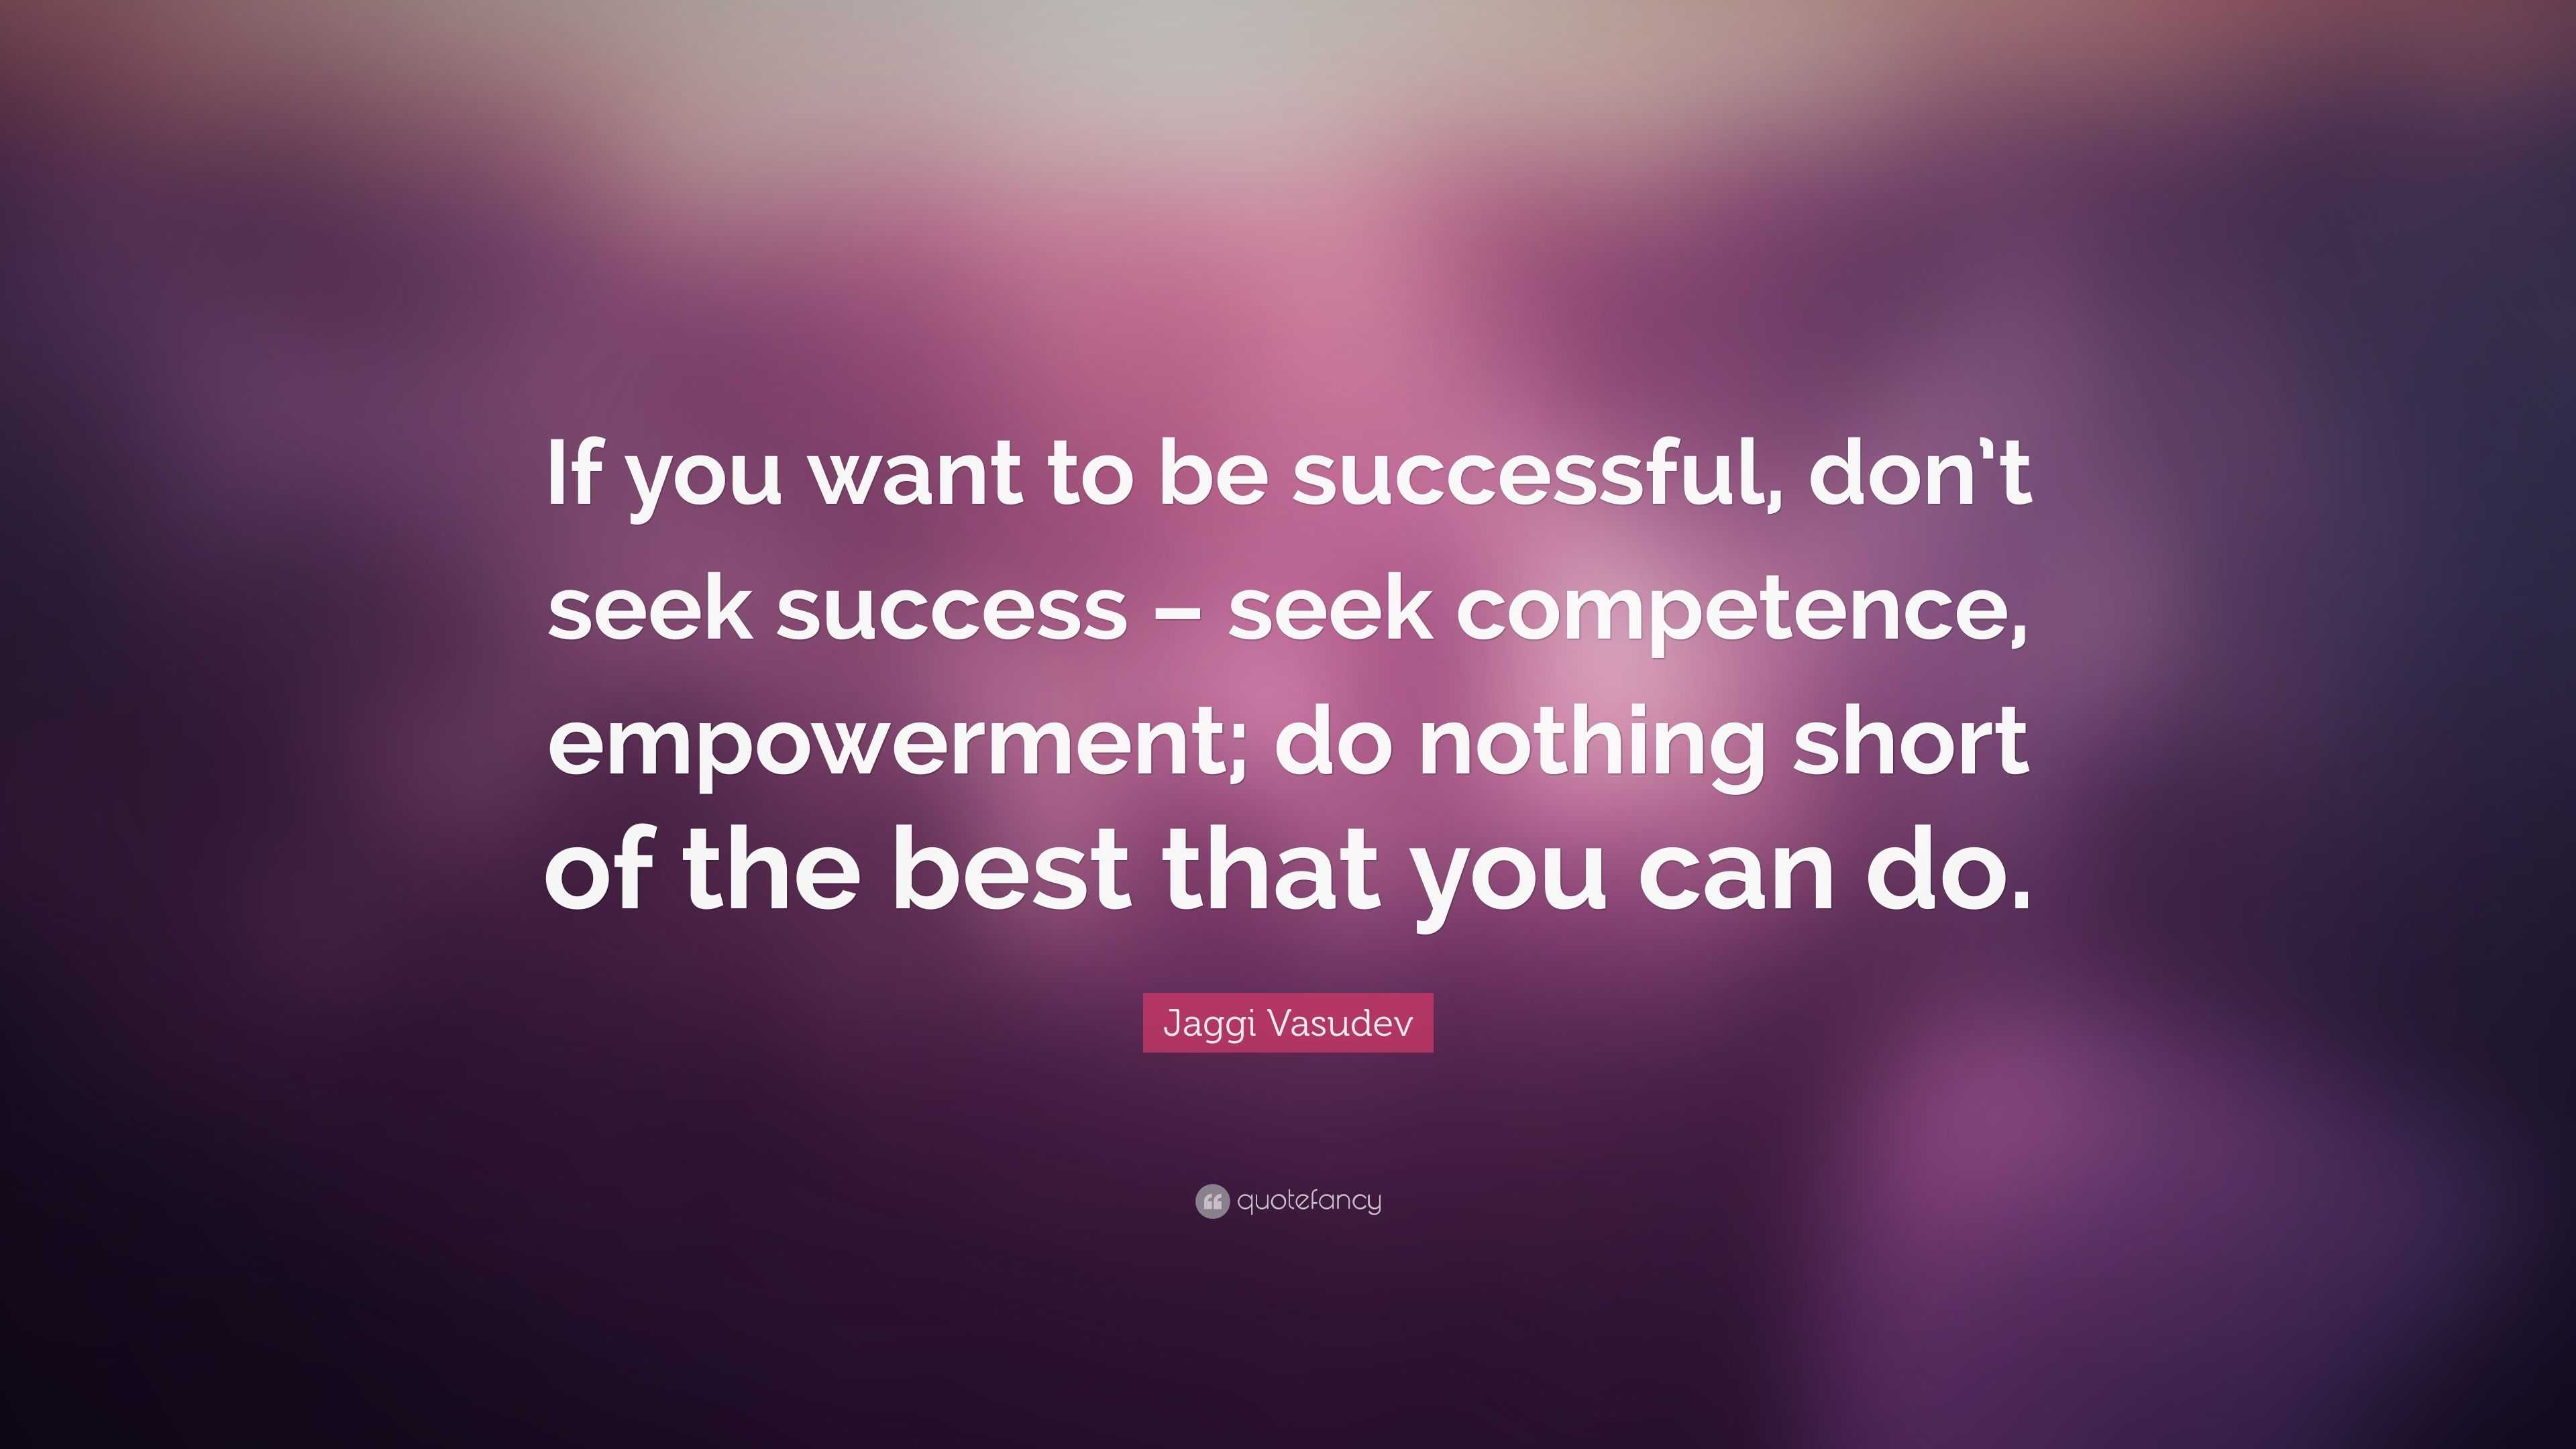 Jaggi Vasudev Quote: “If you want to be successful, don’t seek success ...